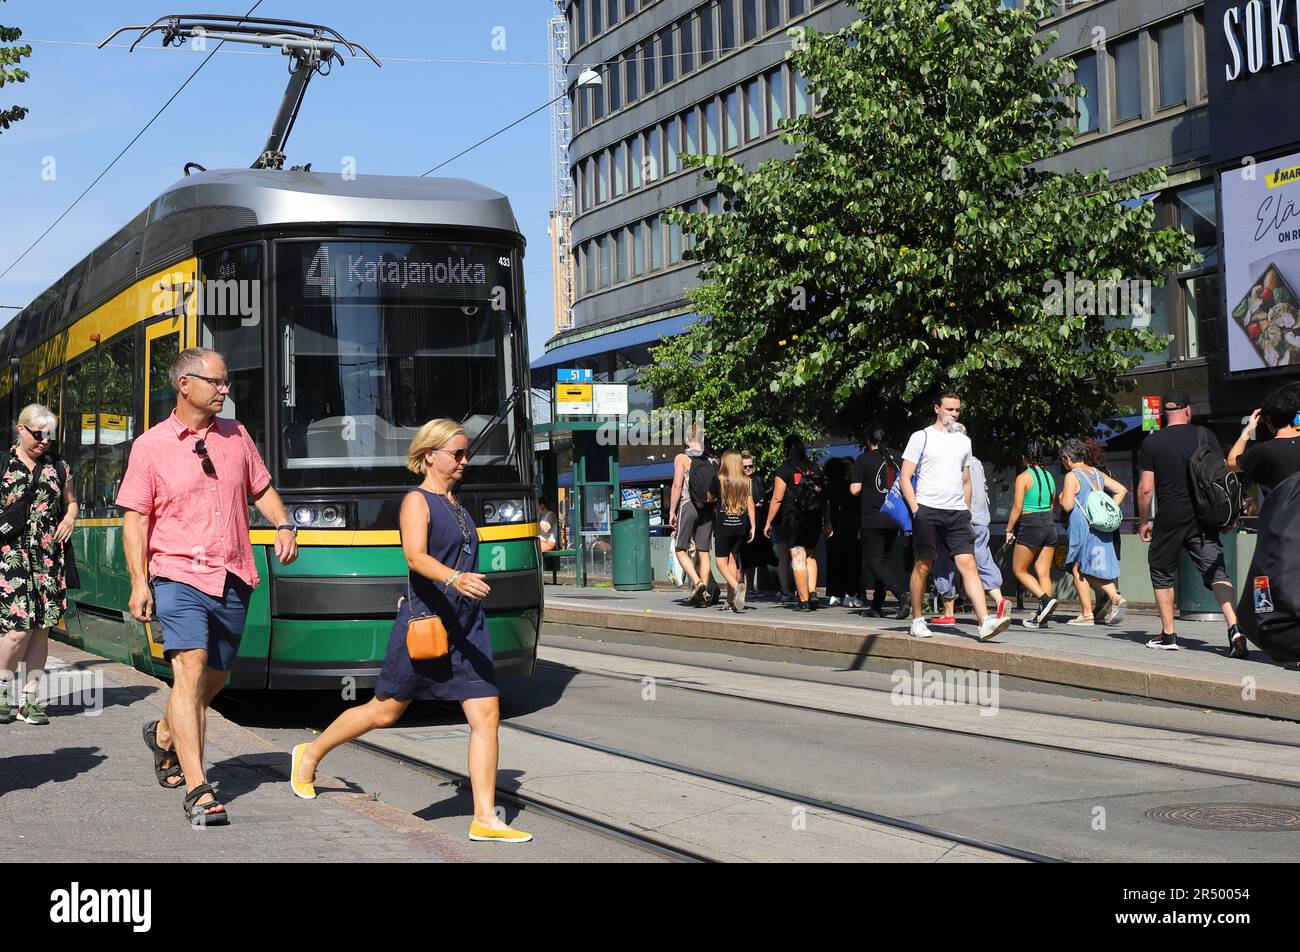 Helsinki, August 20, 2022: Tram and people at tram stop on the Mannerheimintie street outside Sokos department store. Stock Photo